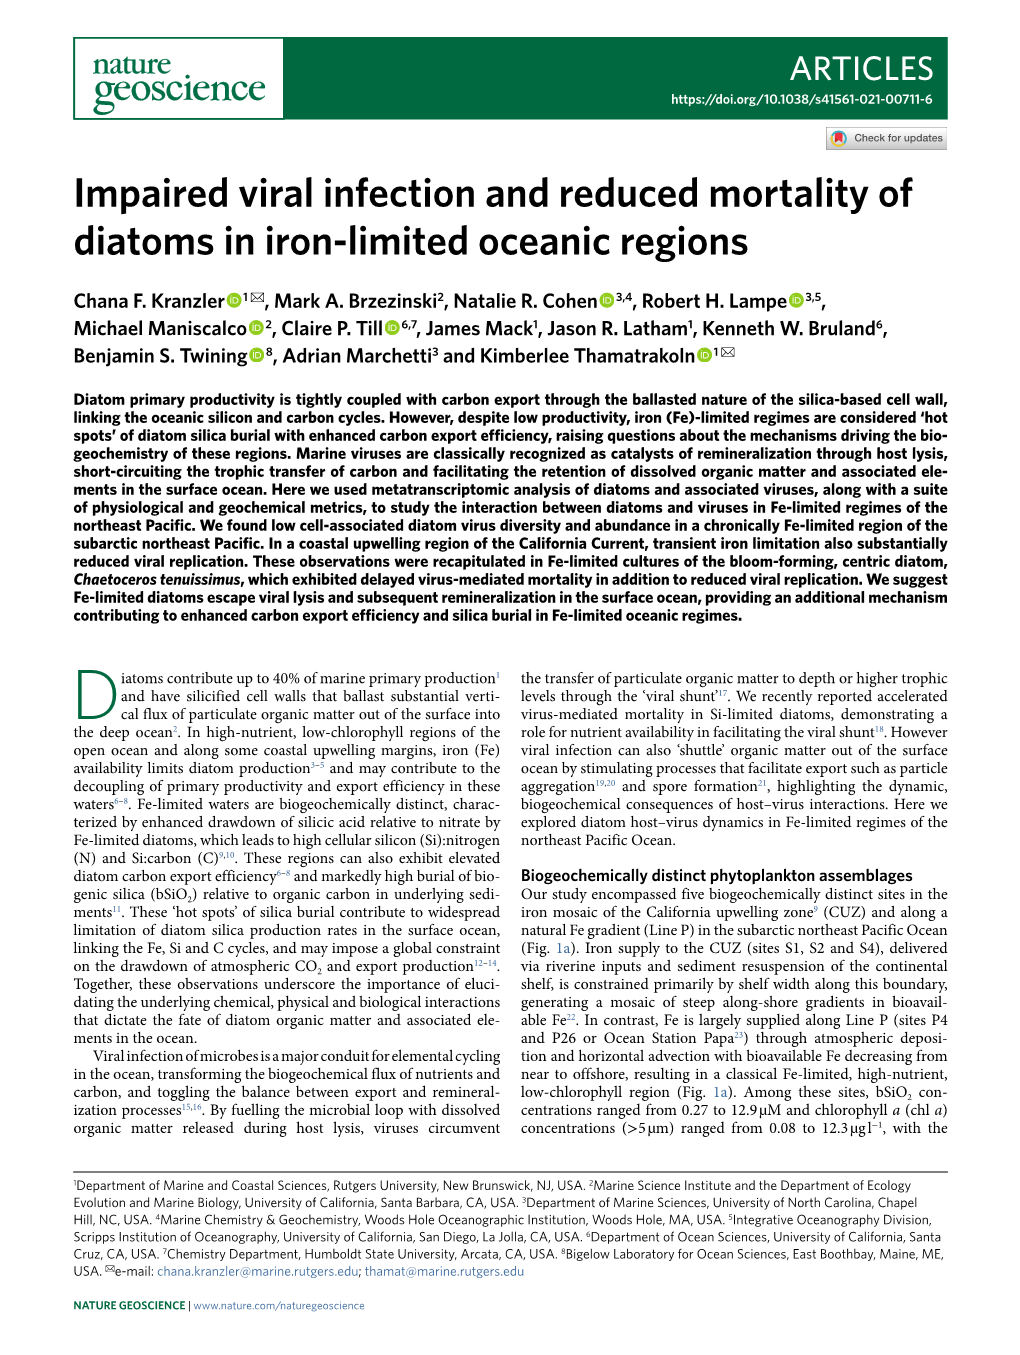 Impaired Viral Infection and Reduced Mortality of Diatoms in Iron-Limited Oceanic Regions